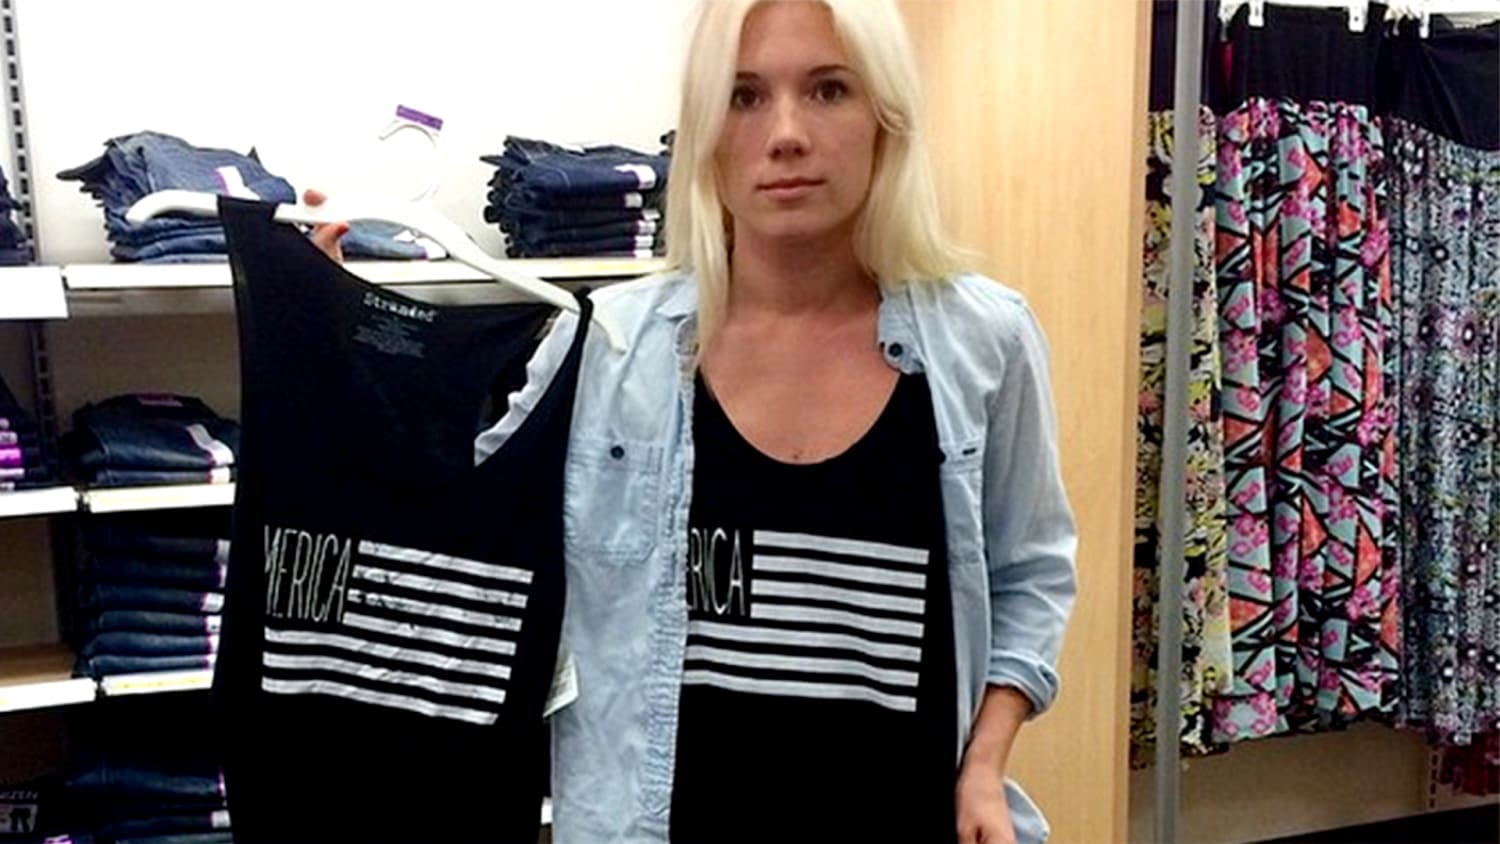 Target pulls shirts after stay-at-home mom claims her design was